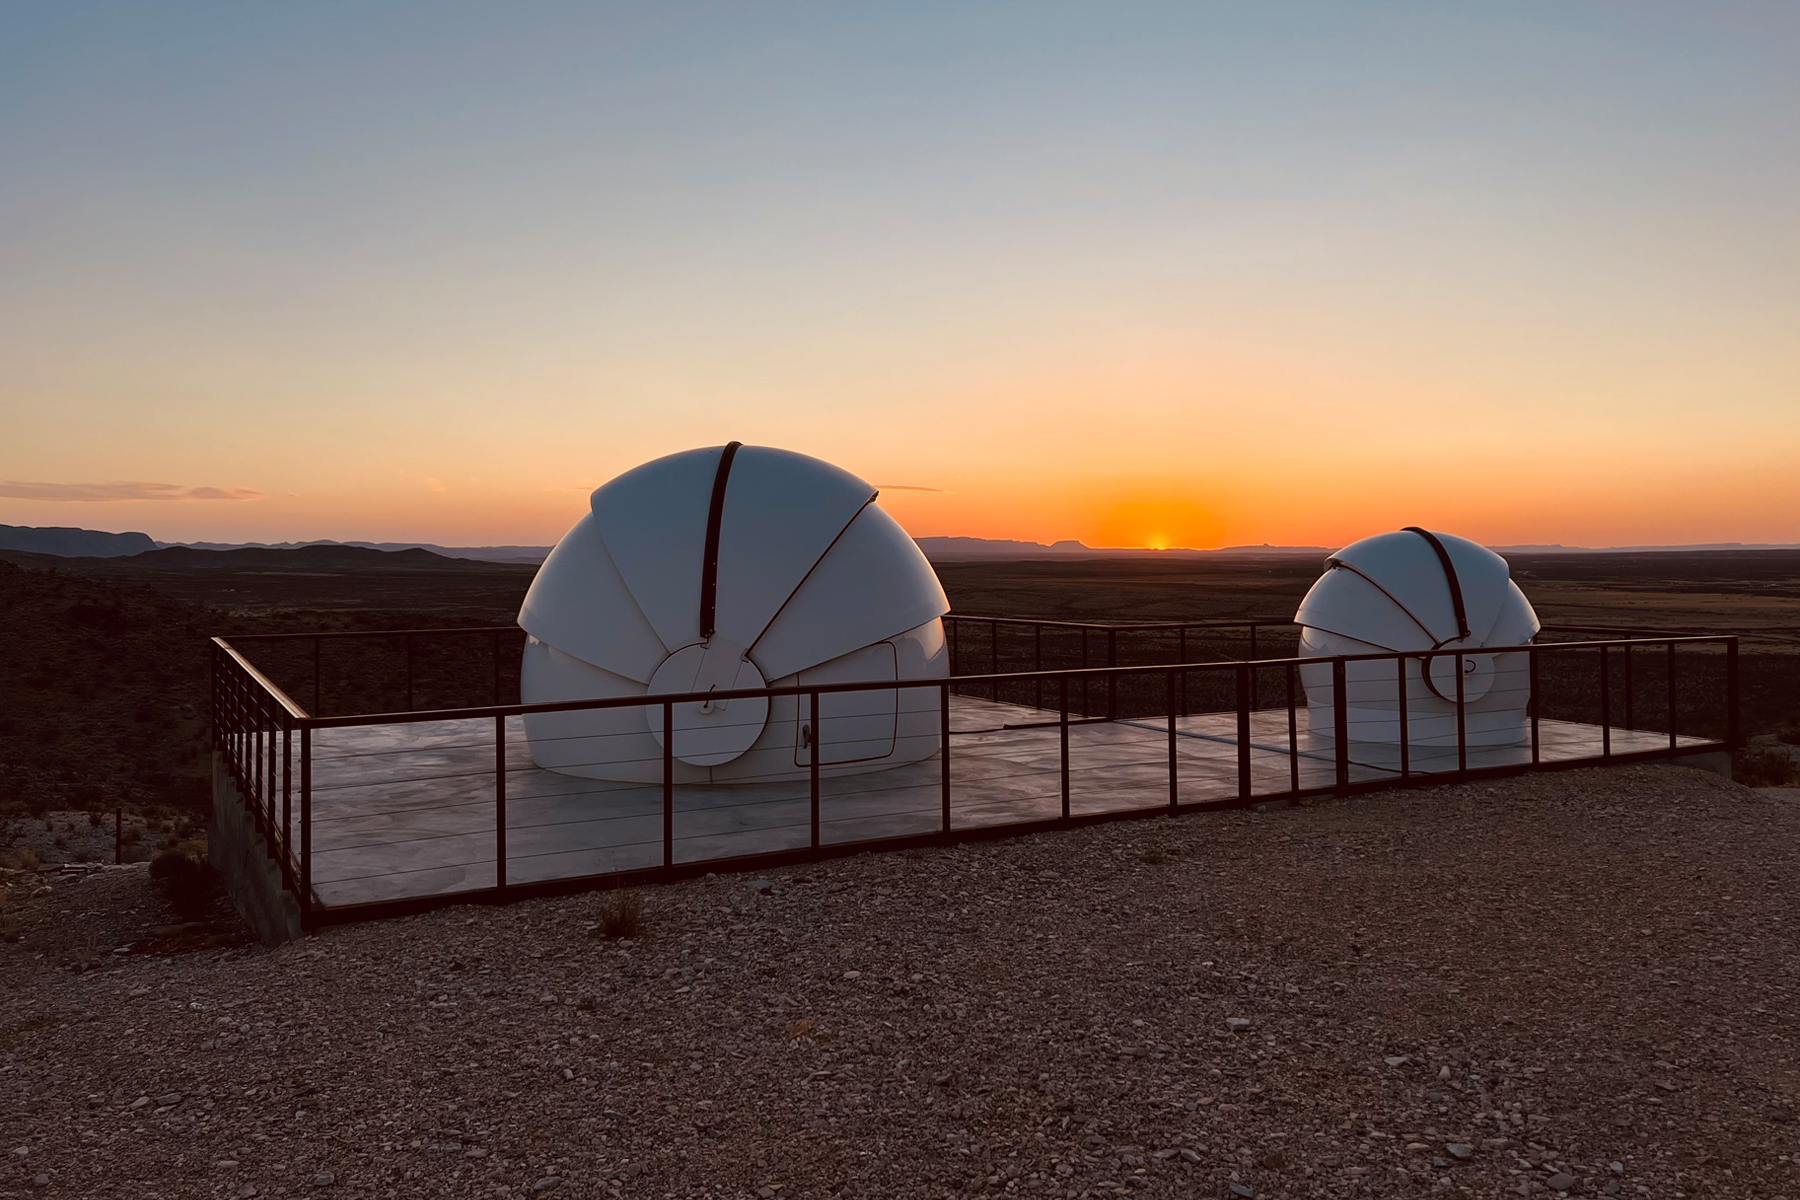 Haiders Future space observatorry in West Texas